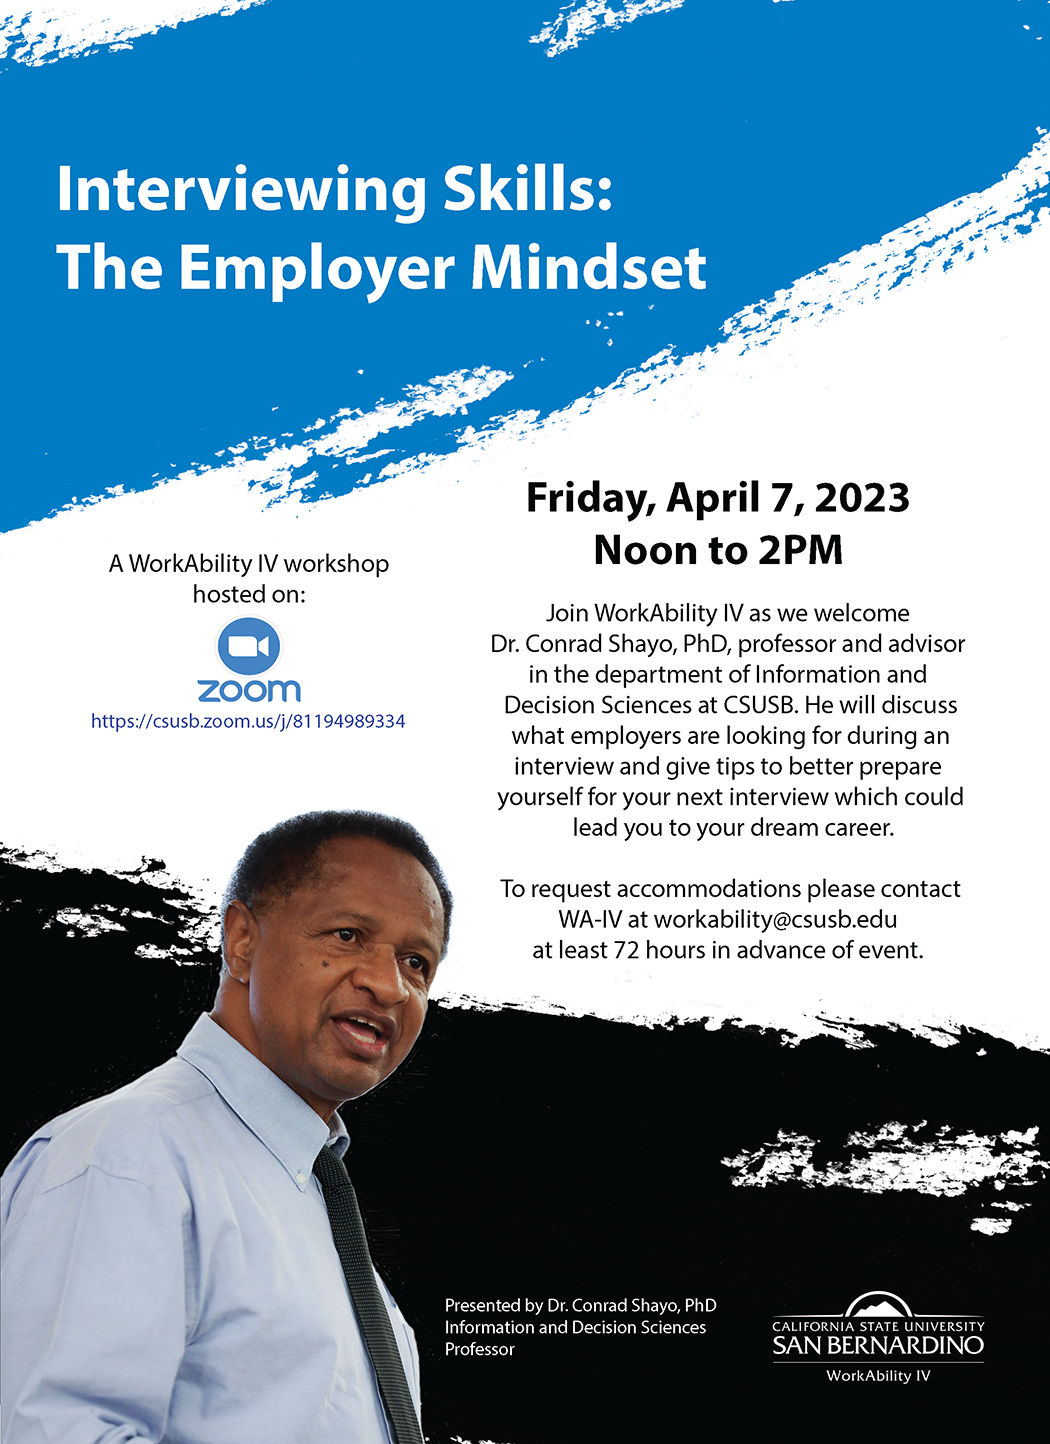 Screenshot of WorkAbility IV workshop presented by Dr. Conrad Shayo, PhD being held on Friday, April 7, 2023 through Zoom. The flyer reads: Interviewing Skills: The Employer Mindset. On the left is a Zoom icon with "A WorkAbility IV workshop hosted on Zoom". On the right is text that says: Friday, April 7, 2023. Noon to 2PM. Join WorkAbility IV as we welcome Dr. Conrad Shayo, PhD, professor and advisor in the department of Information and Decision Sciences at CSUSB. He will discuss what employers are looking for during an interview and give tips to better prepare yourself for your next interview which could lead you to your dream career. To request accommodations please contact WA-IV at workability@csusb.edu at least 72 hours in advance of event. Bottom left of the flyer has a picture of Dr. Shayo in a light blue button up shirt with a dark tie that has small silver dots on it. Next to the photo is a caption that says "Presented by Dr. Conrad Shayo, PhD Information and Decision Sciences Professor". I the bott